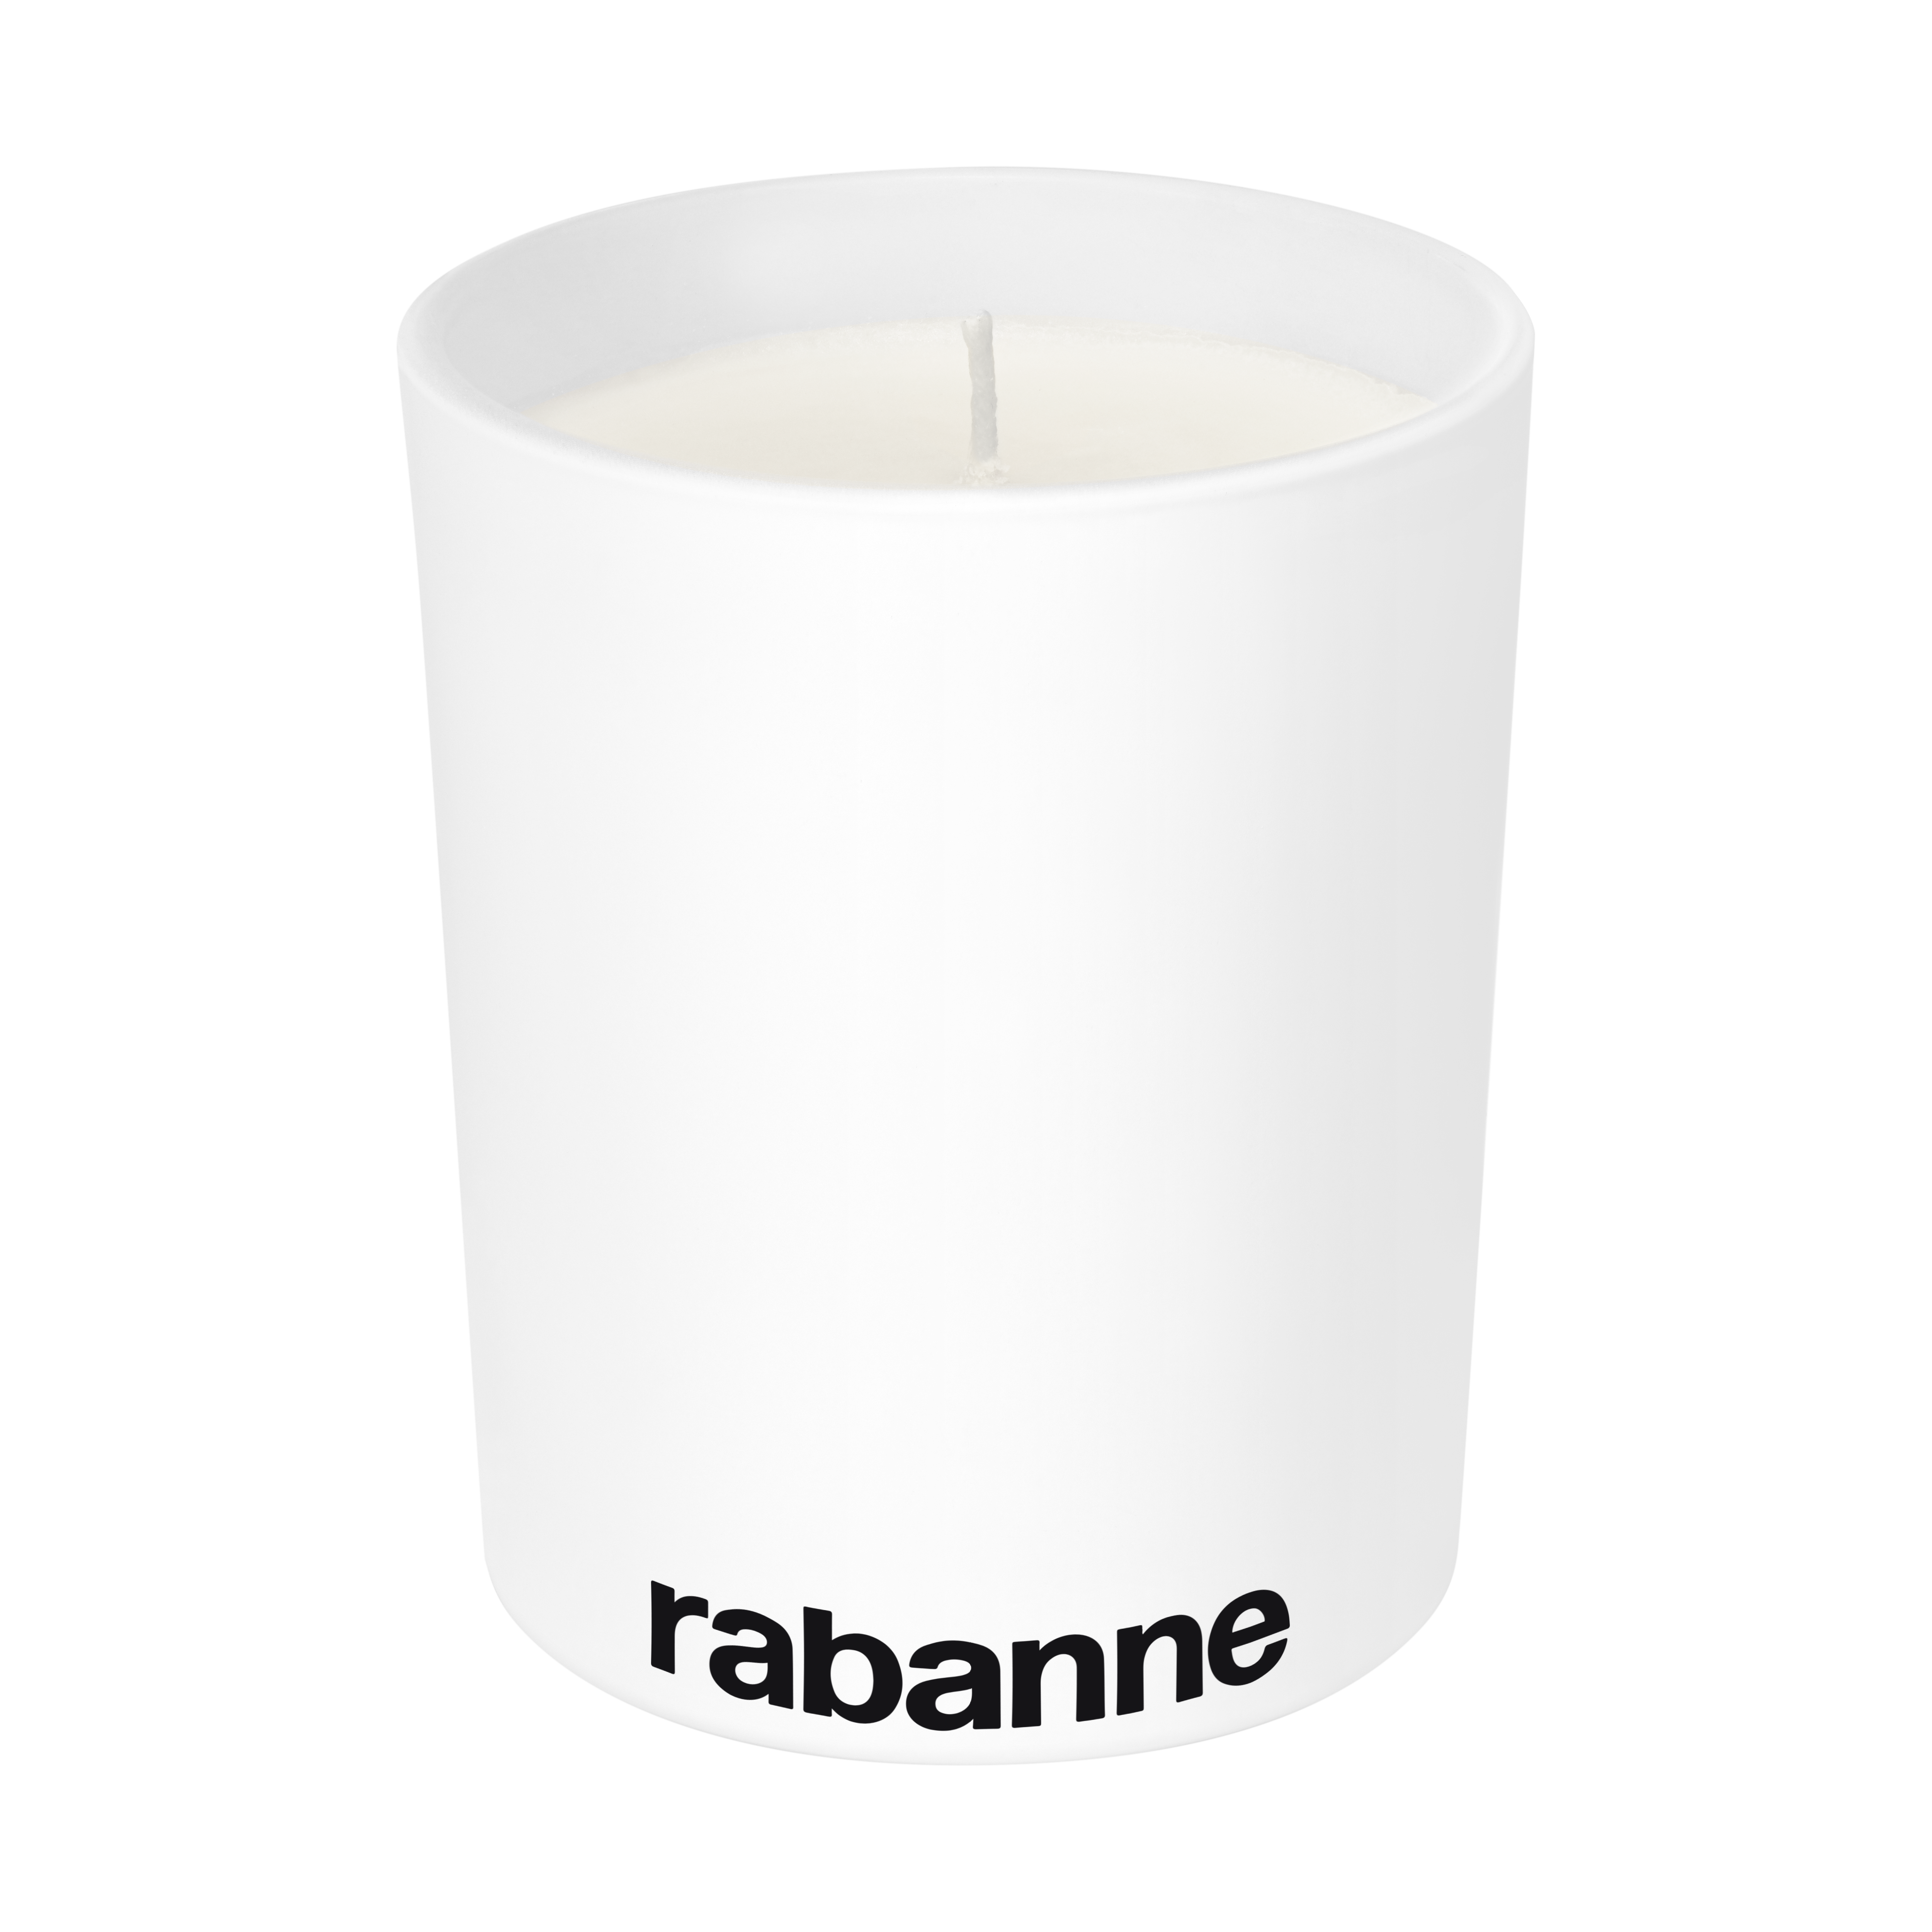 PR FAME CORPORATE CANDLE 100G GWP 24 L3